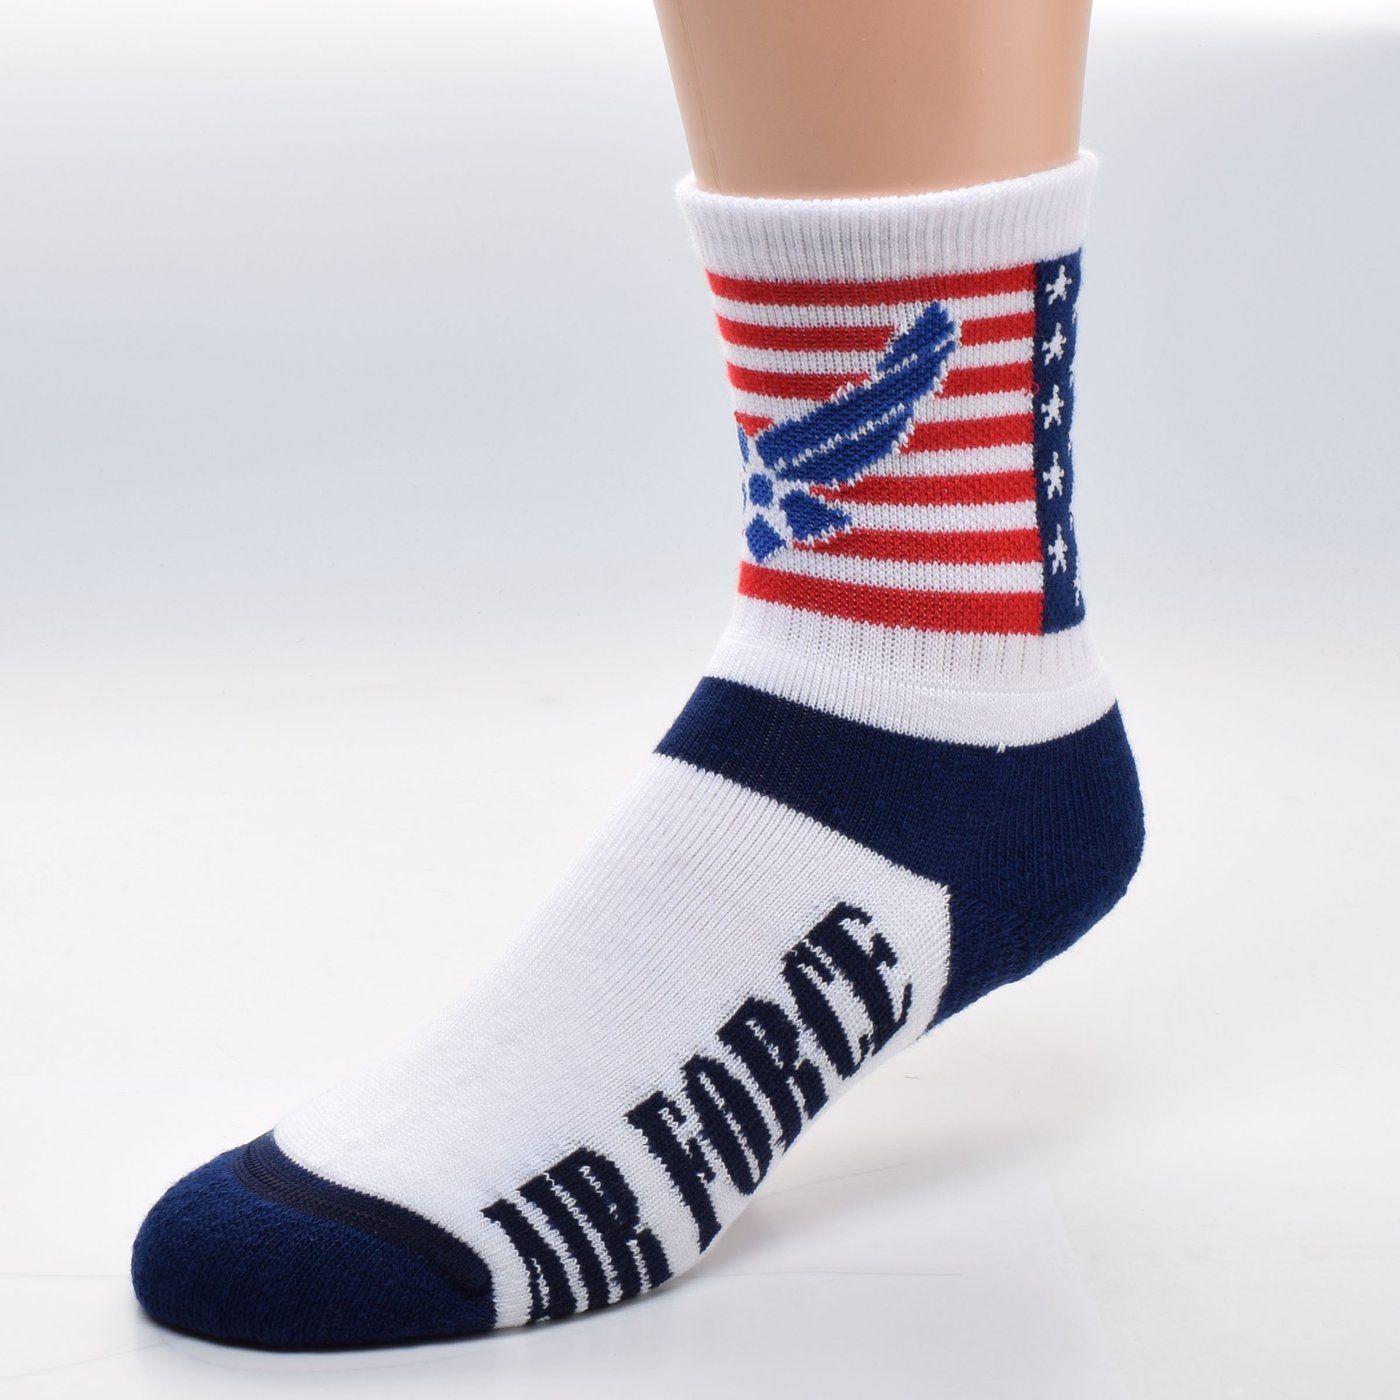 Red Foot White Wing Logo - FBF US Air Force Cuff Sock – Socks by My Foot Fetish